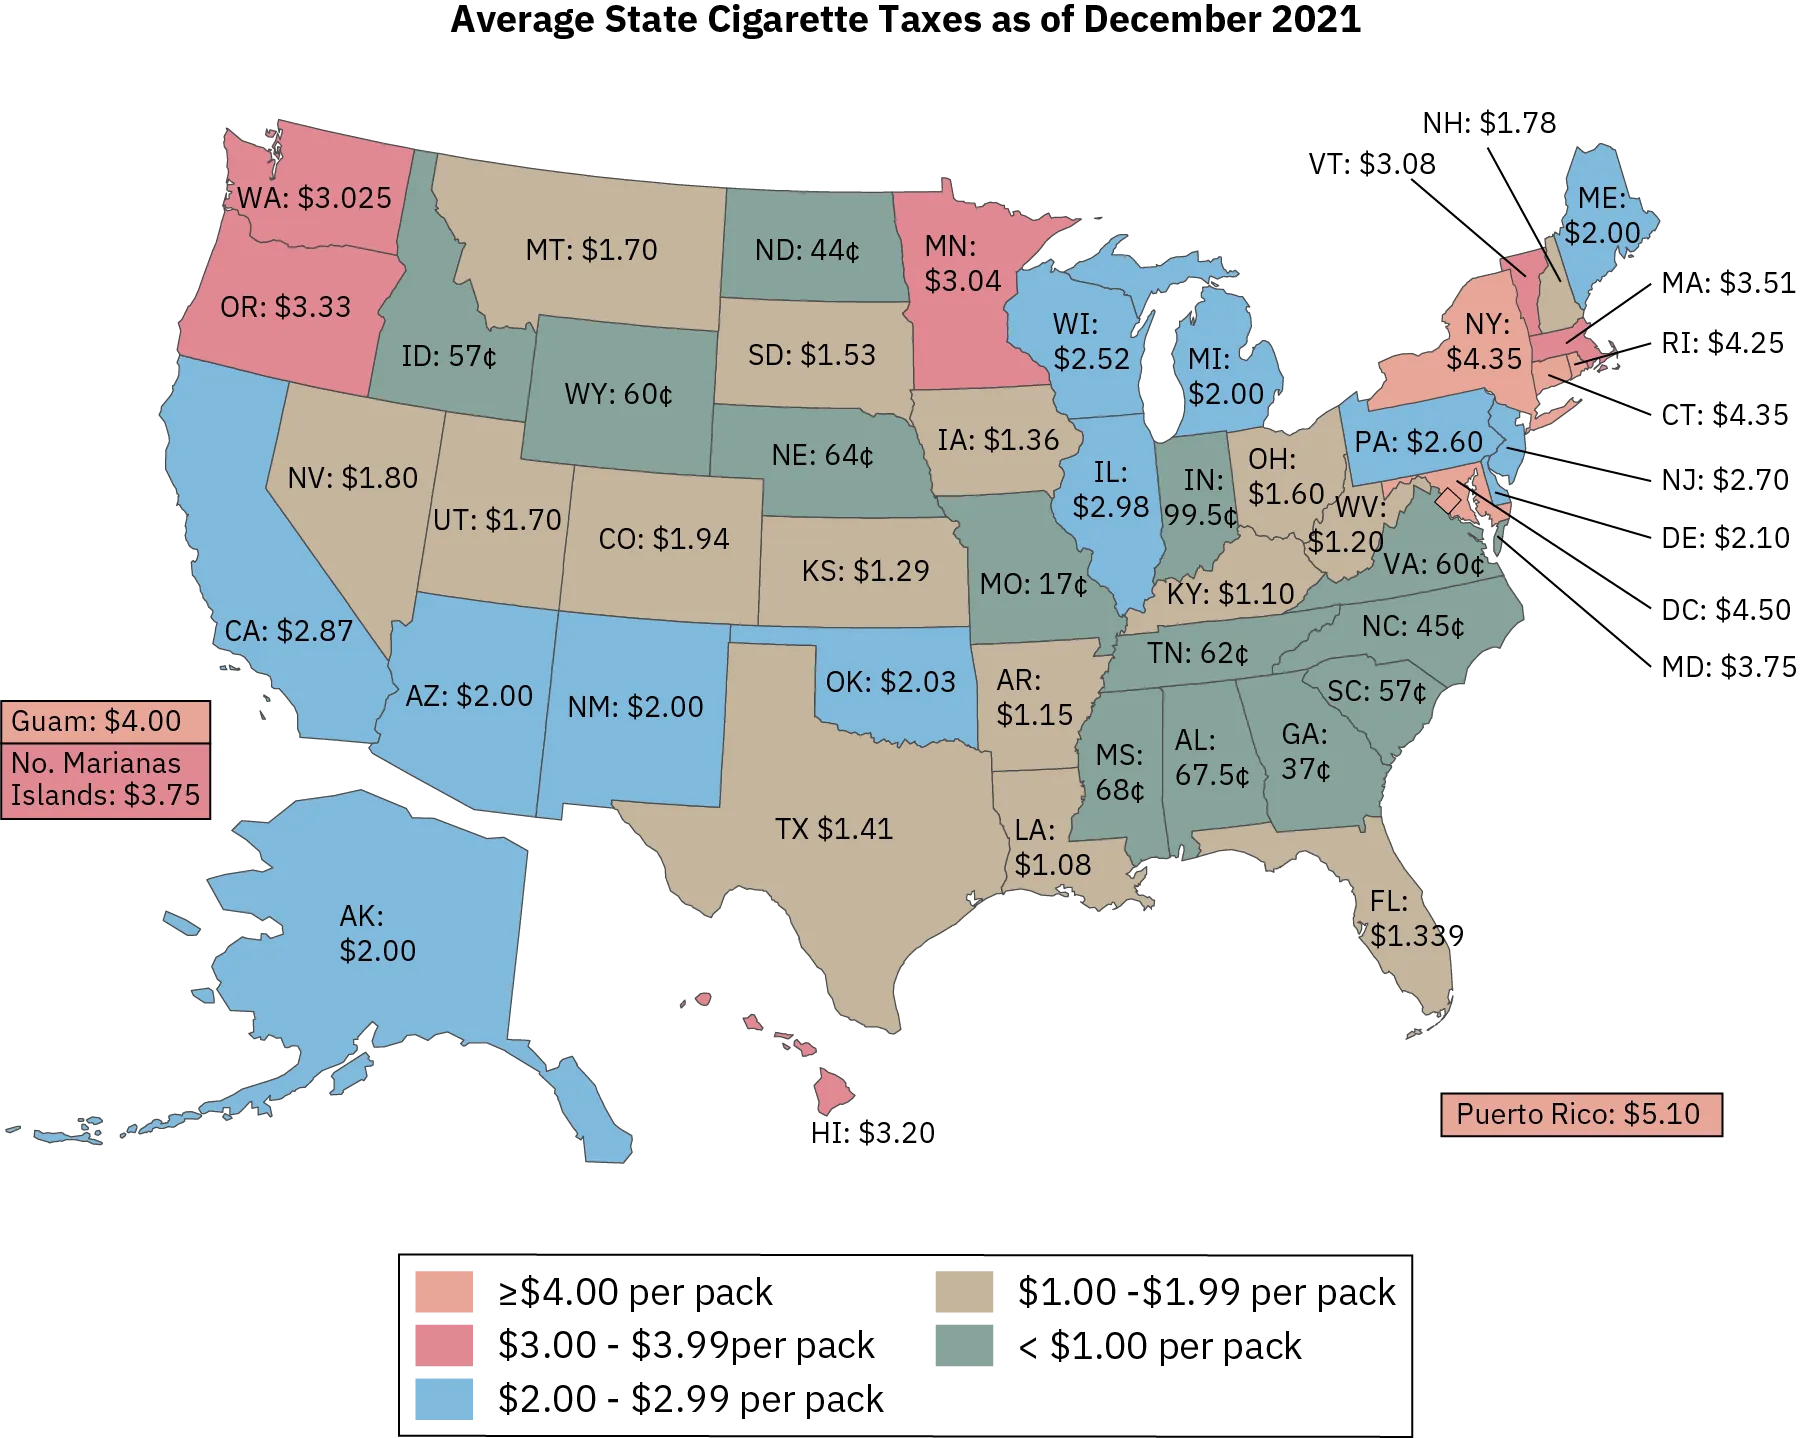 A map shows state cigarette tax rates as of December 2021. Thirteen states and territories have cigarette tax rates of less than $1.00 per pack; fifteen states and territories have cigarette tax rates between $1.00 and $1.99 per pack; twelve states and territories have a cigarette tax rate between $2.00 and $2.99 per pack; six states or territories have cigarette tax rates between $3.00 and $3.99 a pack; and four states or territories have cigarette tax rates higher than $4.00 a pack. Missouri’s tax rate is the lowest, at 17 cents a pack; Puerto Rico’s tax rate is the highest, at $5.10 a pack.